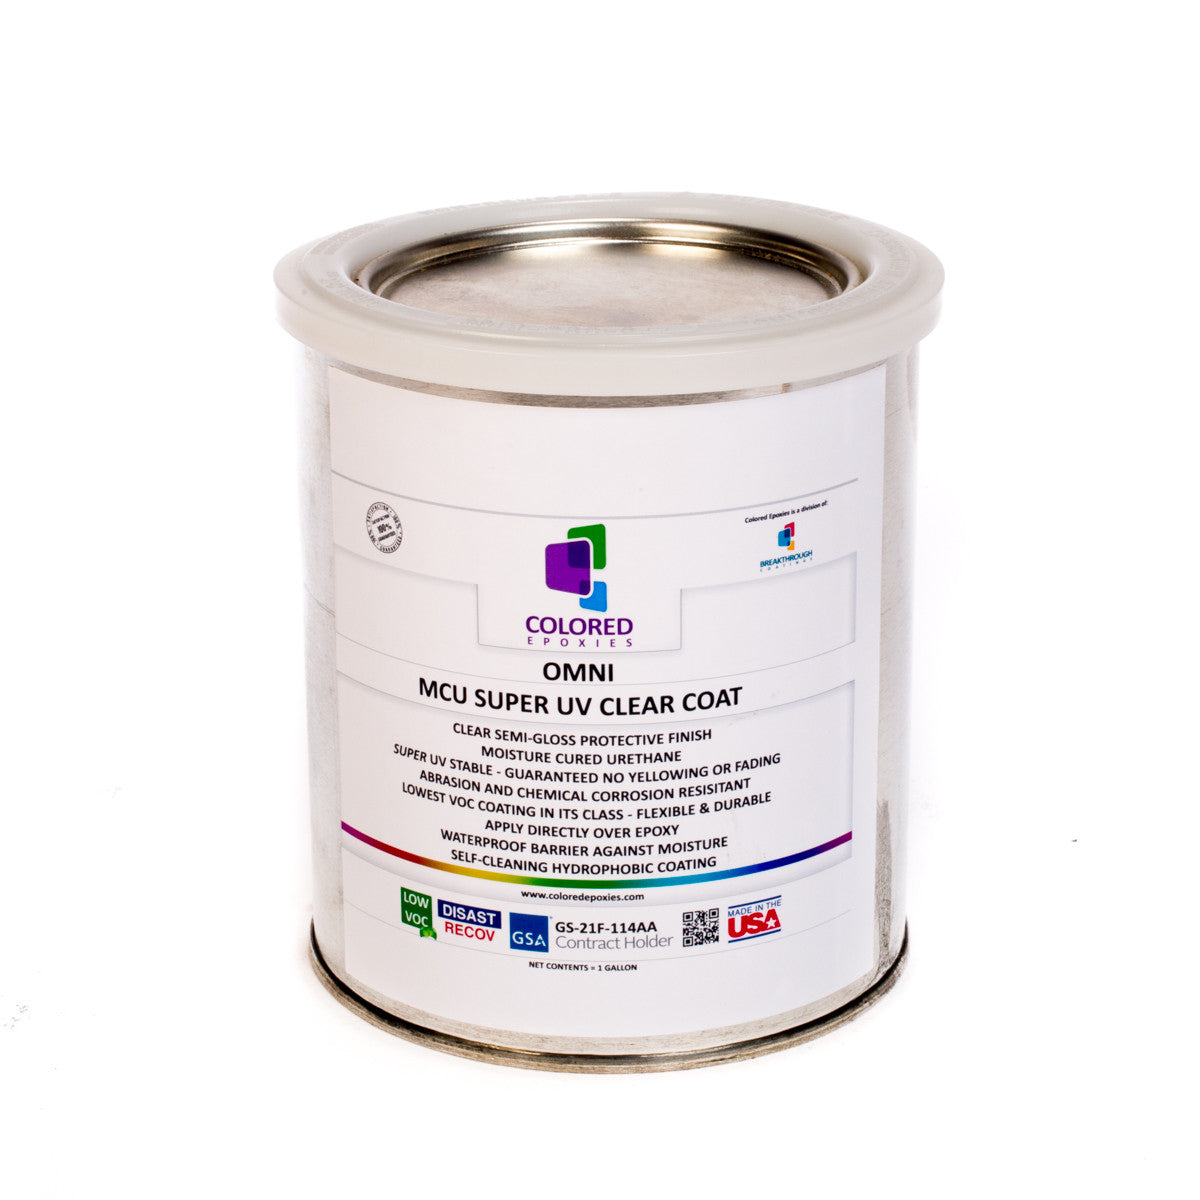 UV cure resin, more than just clear coat 